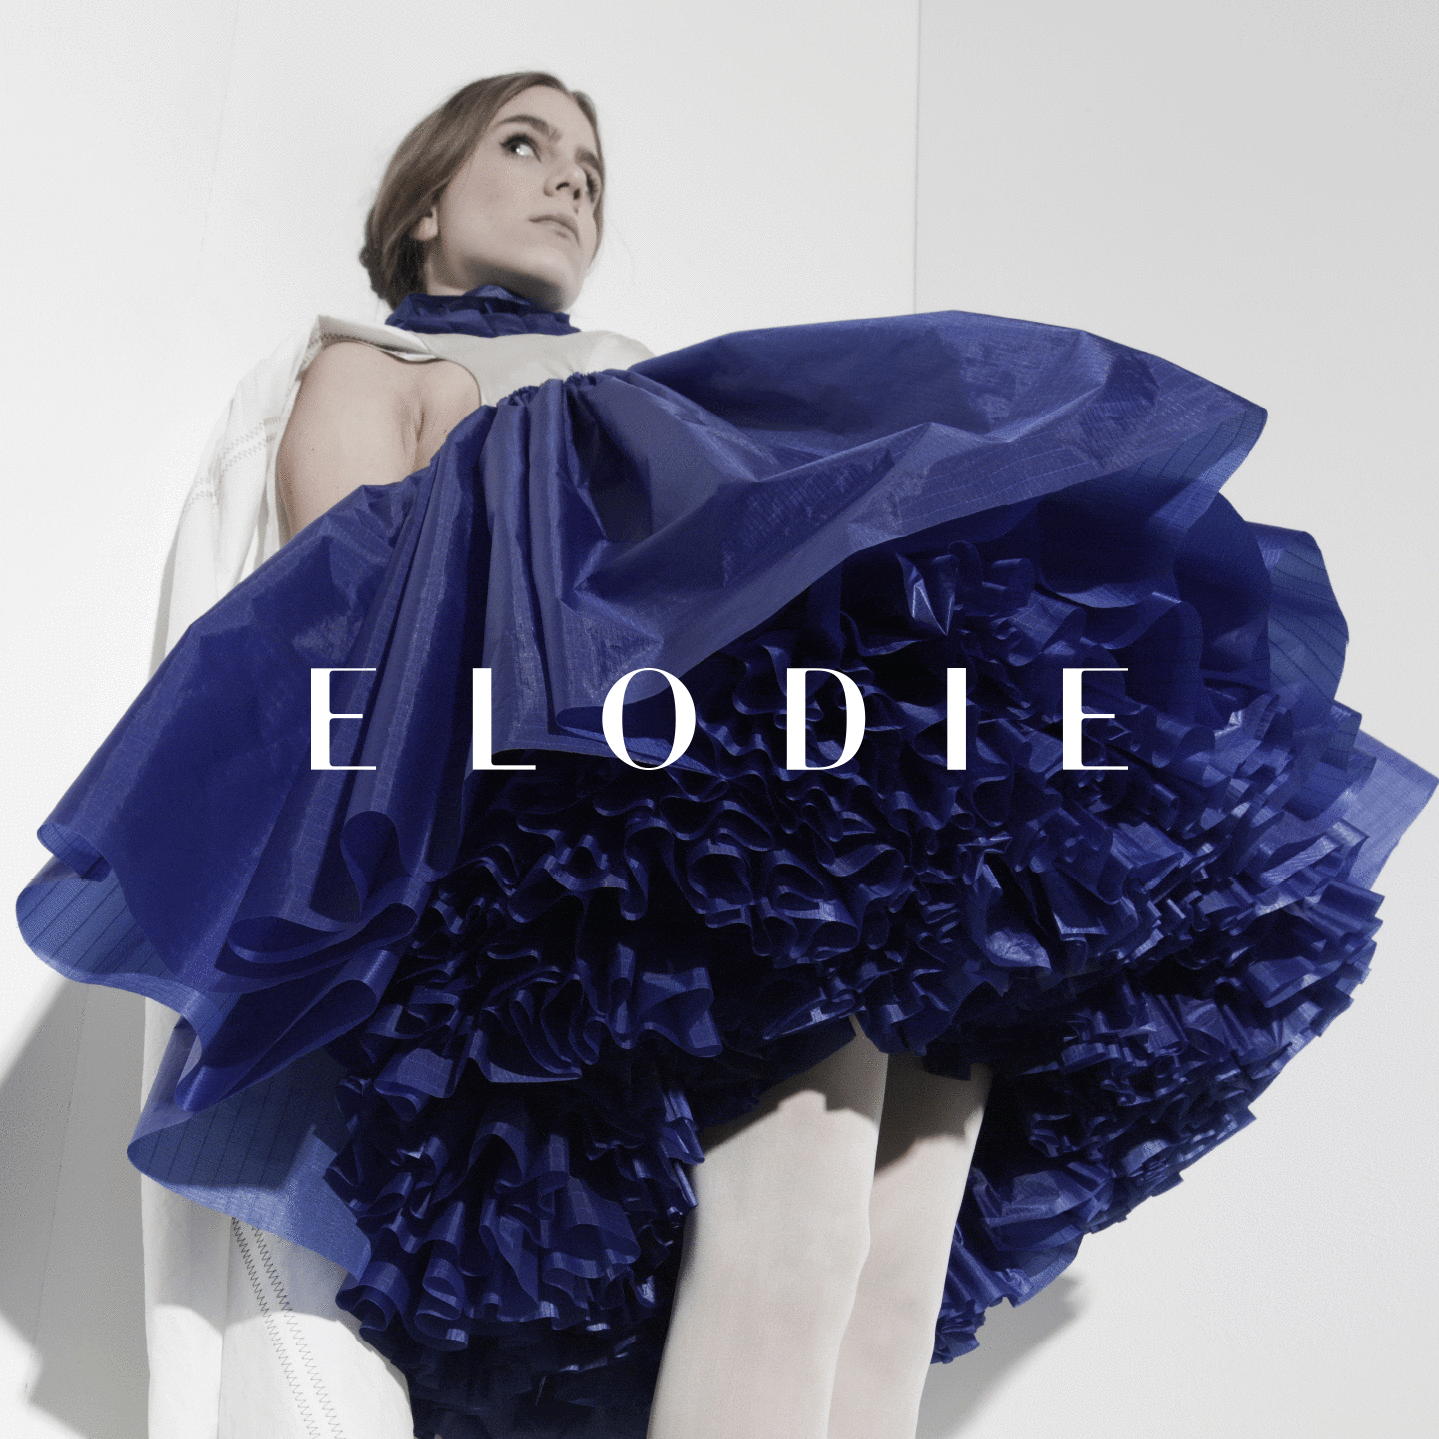 ELODIE Branded Animation